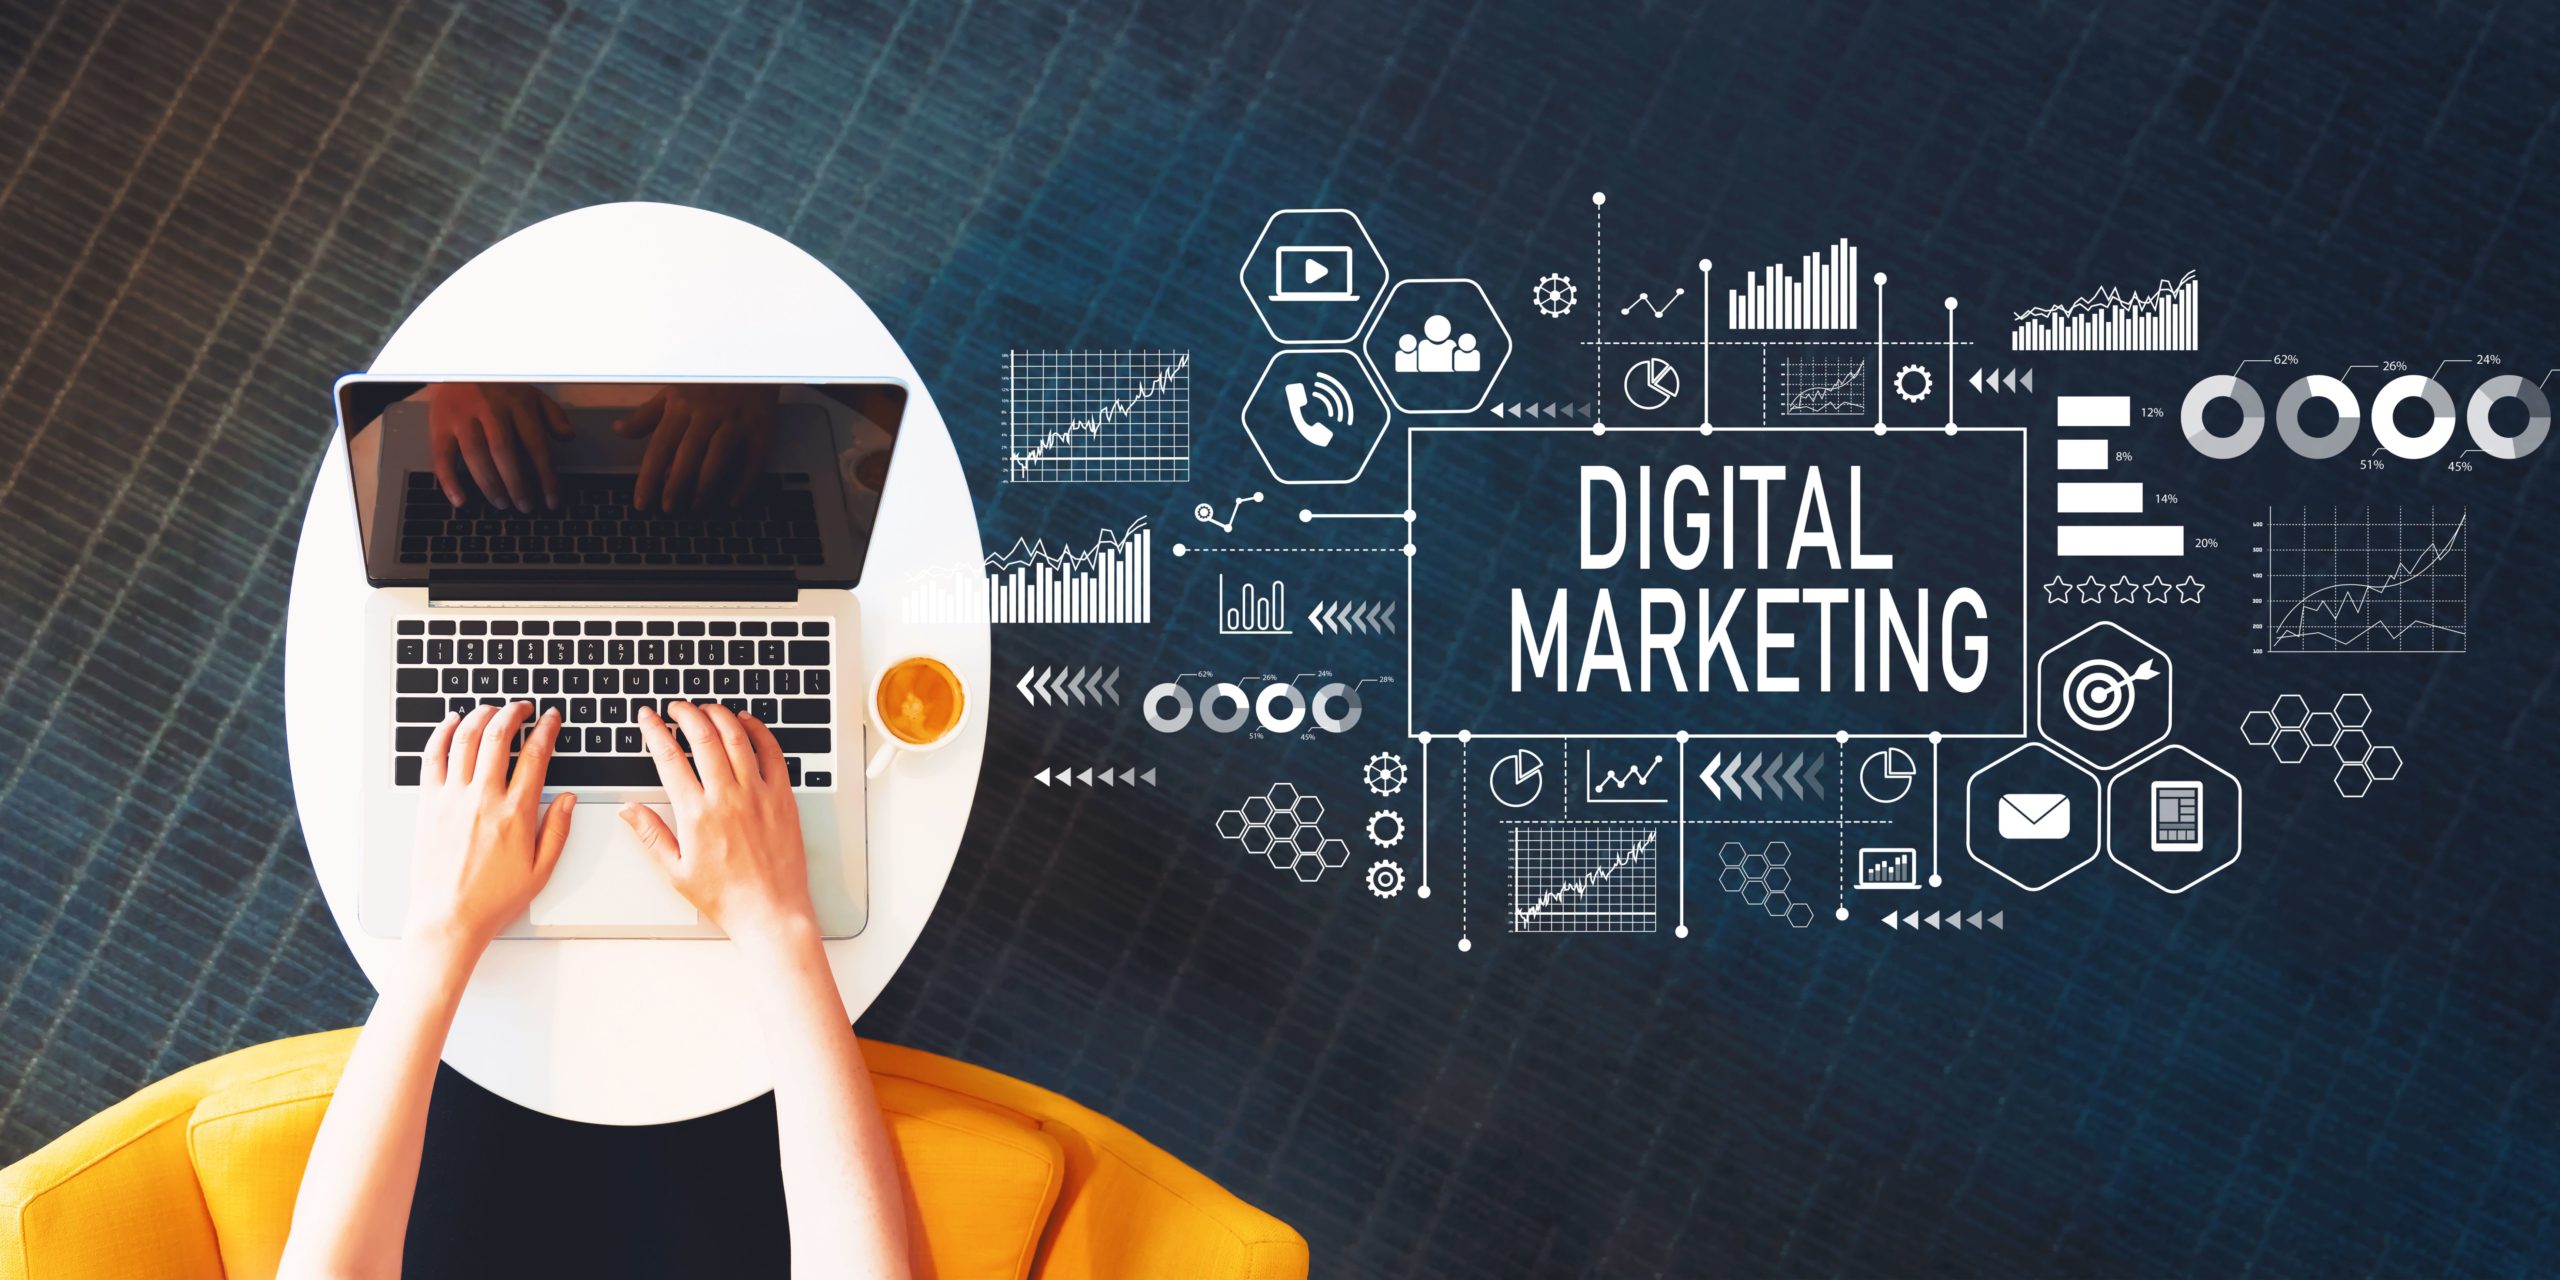 Here are the key skills for digital marketing in 2022